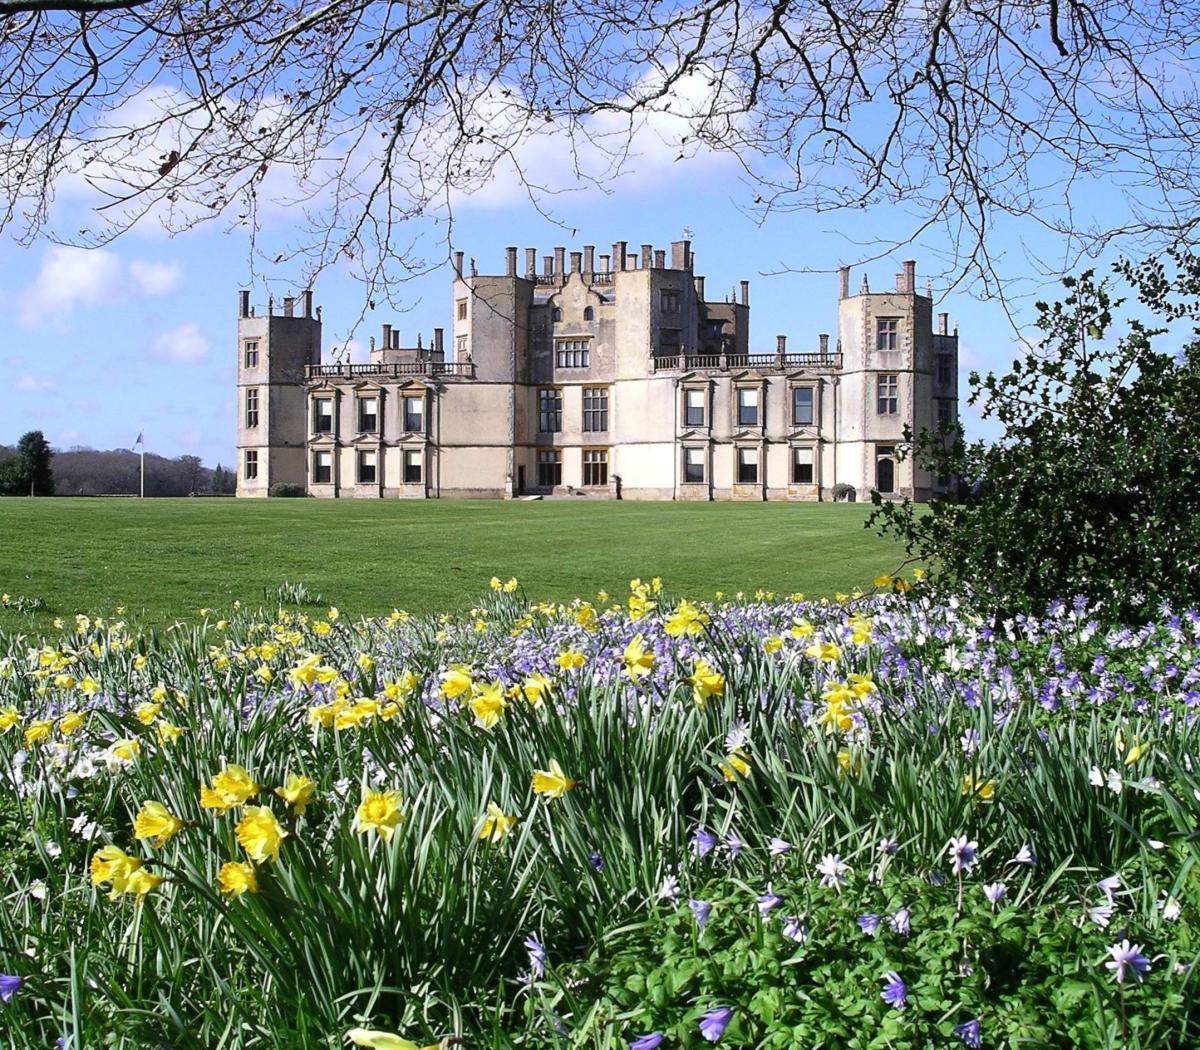 Spring flowers at Sherborne Castle and Gardens in Dorset